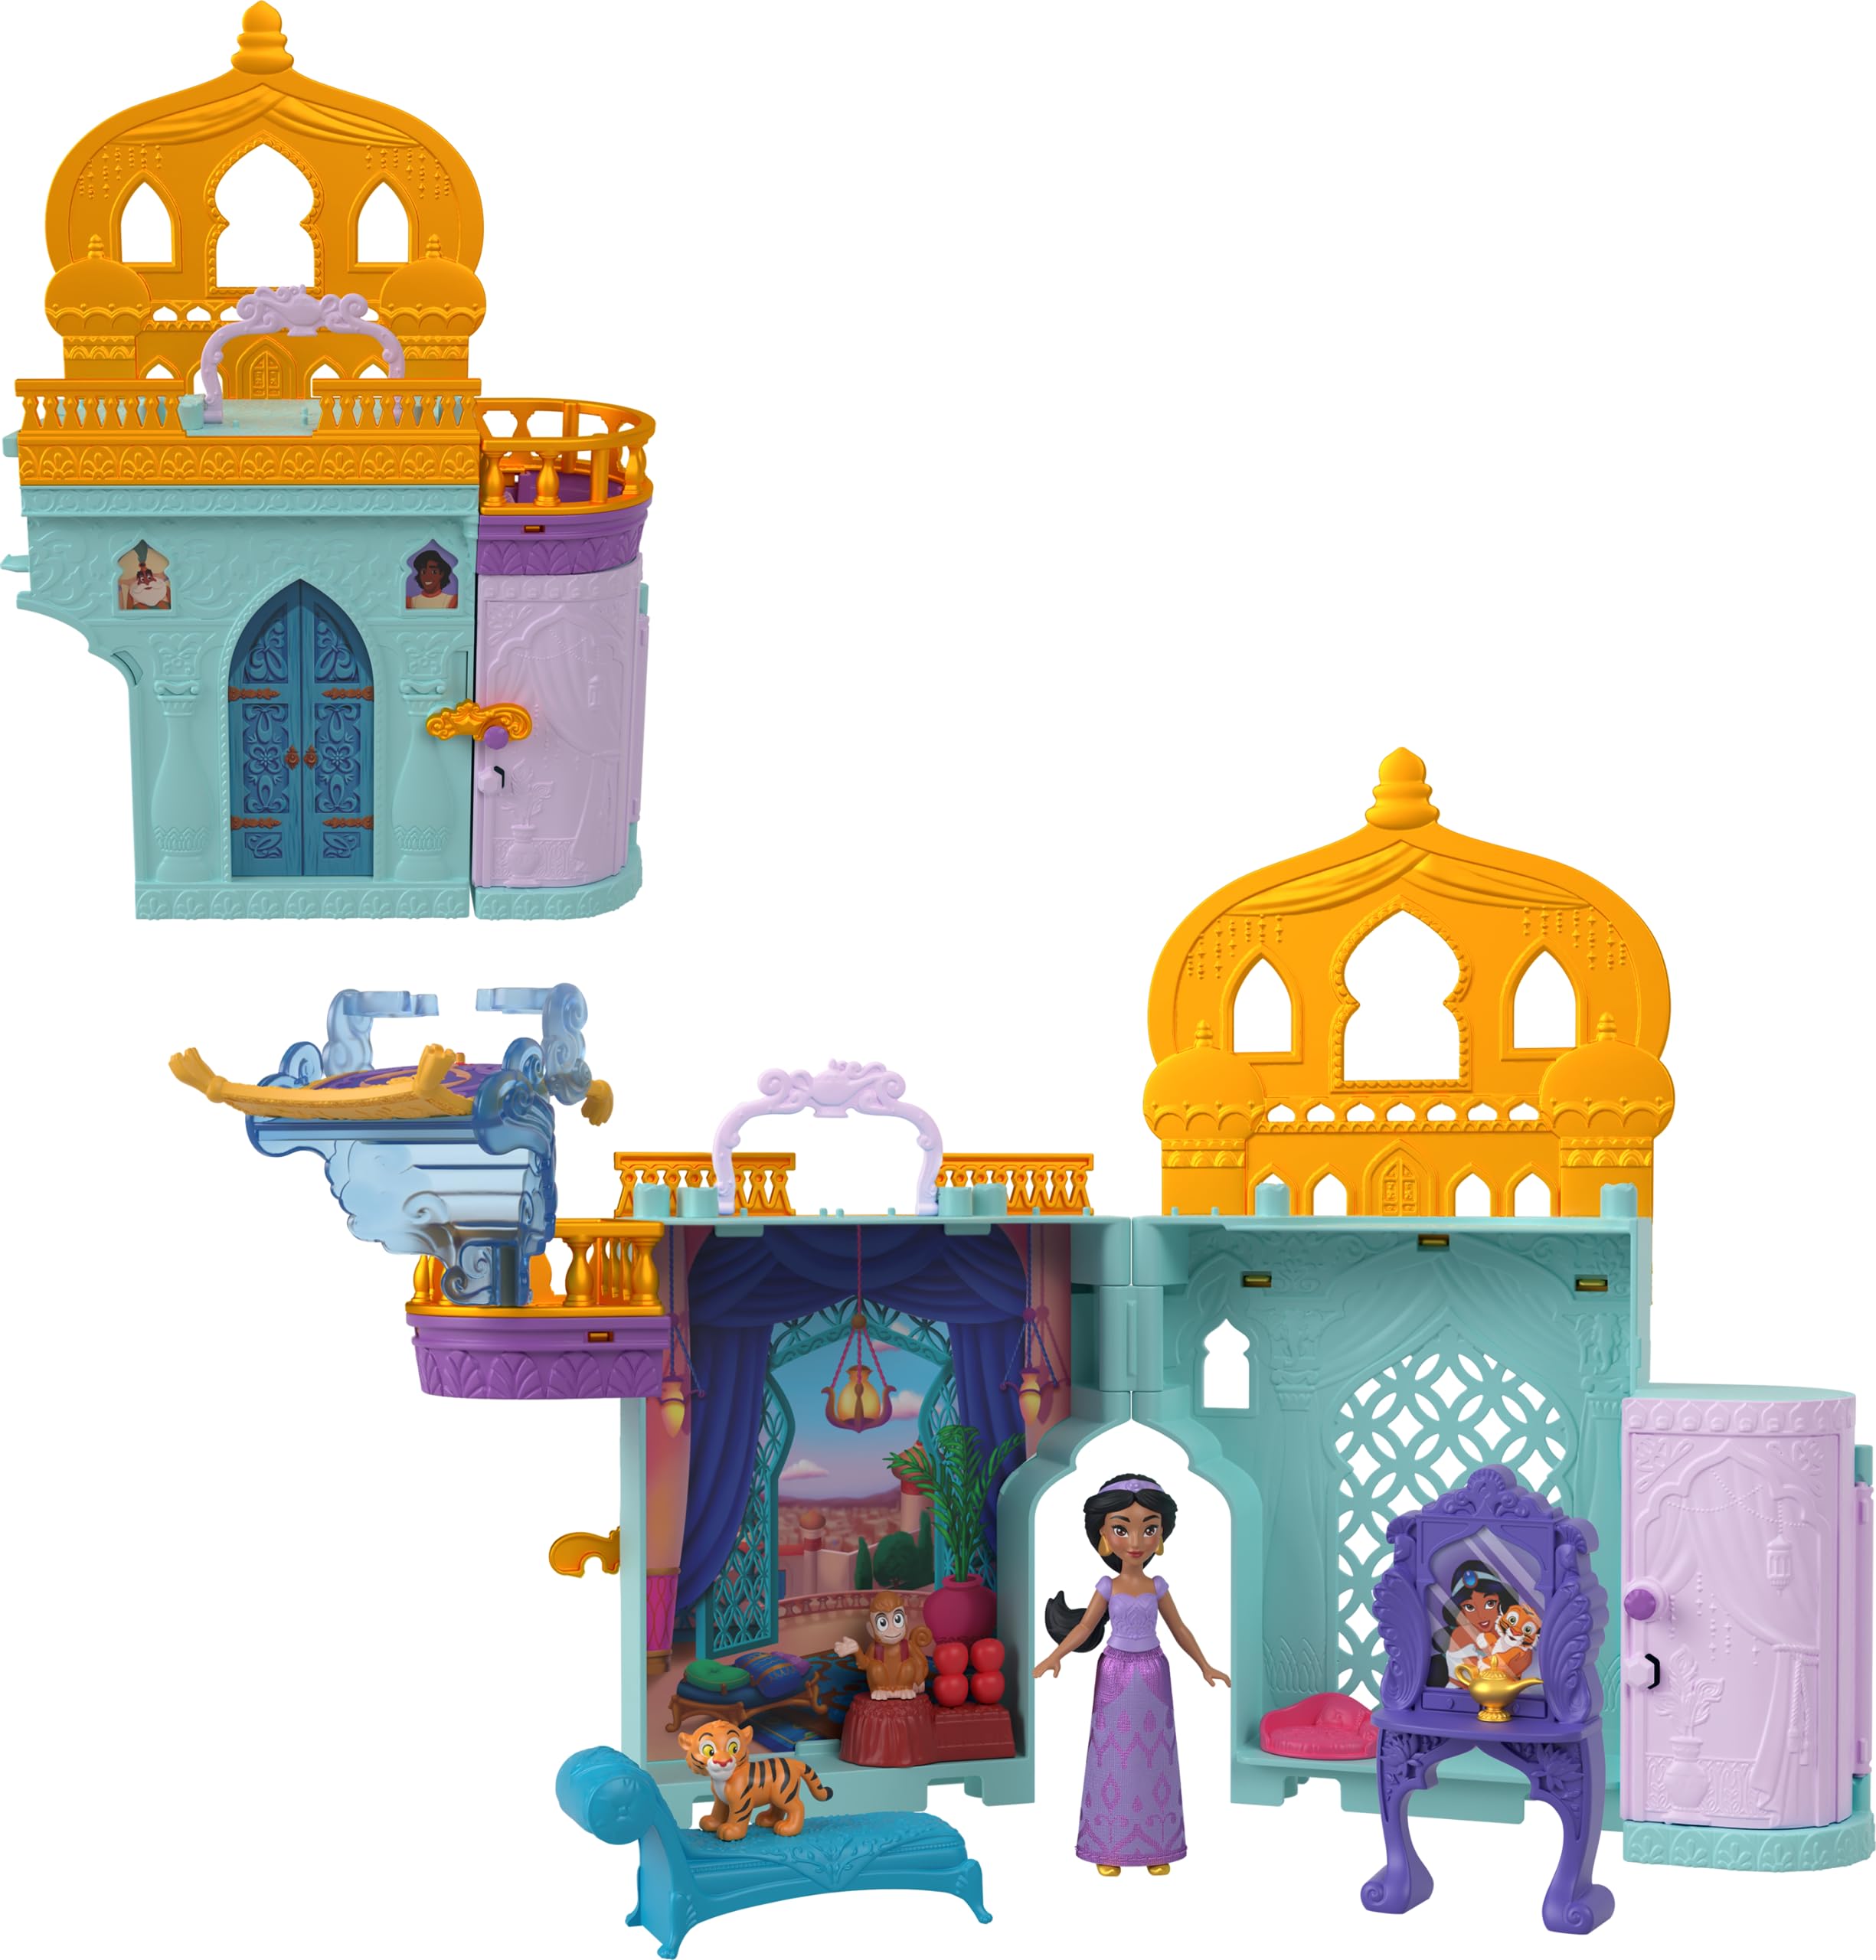 Mattel Disney Princess Toys, Jasmine Stackable Castle Doll House Playset with Small Doll, 2 Friends and 7 Pieces, Inspired by The Disney Movie, Kids Travel Toys and Gifts